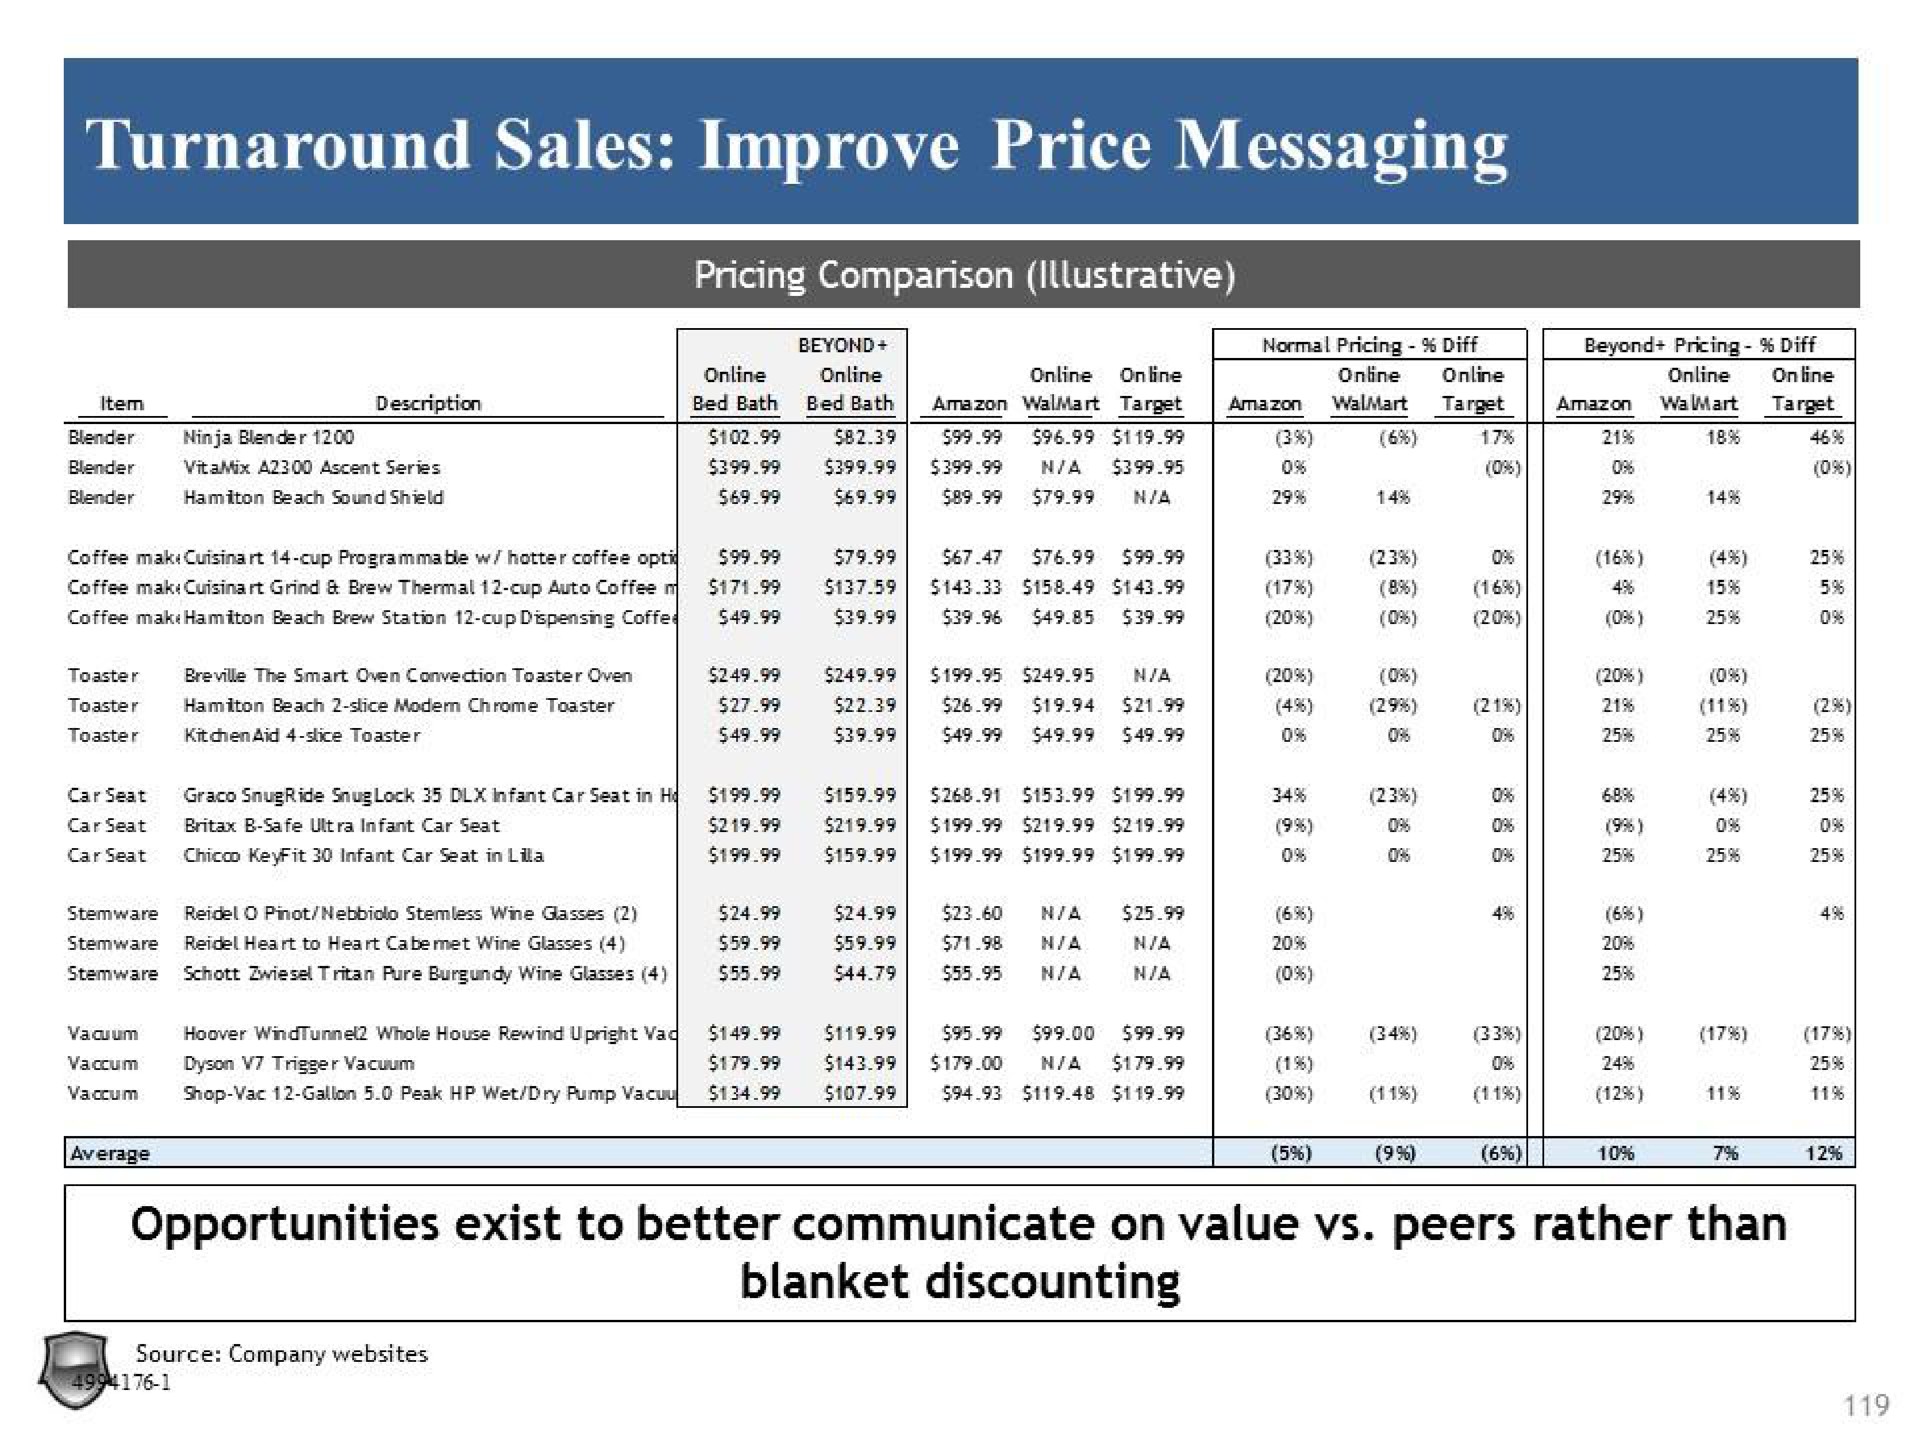 turnaround sales improve price messaging opportunities exist to better communicate on value peers rather than blanket discounting | Legion Partners